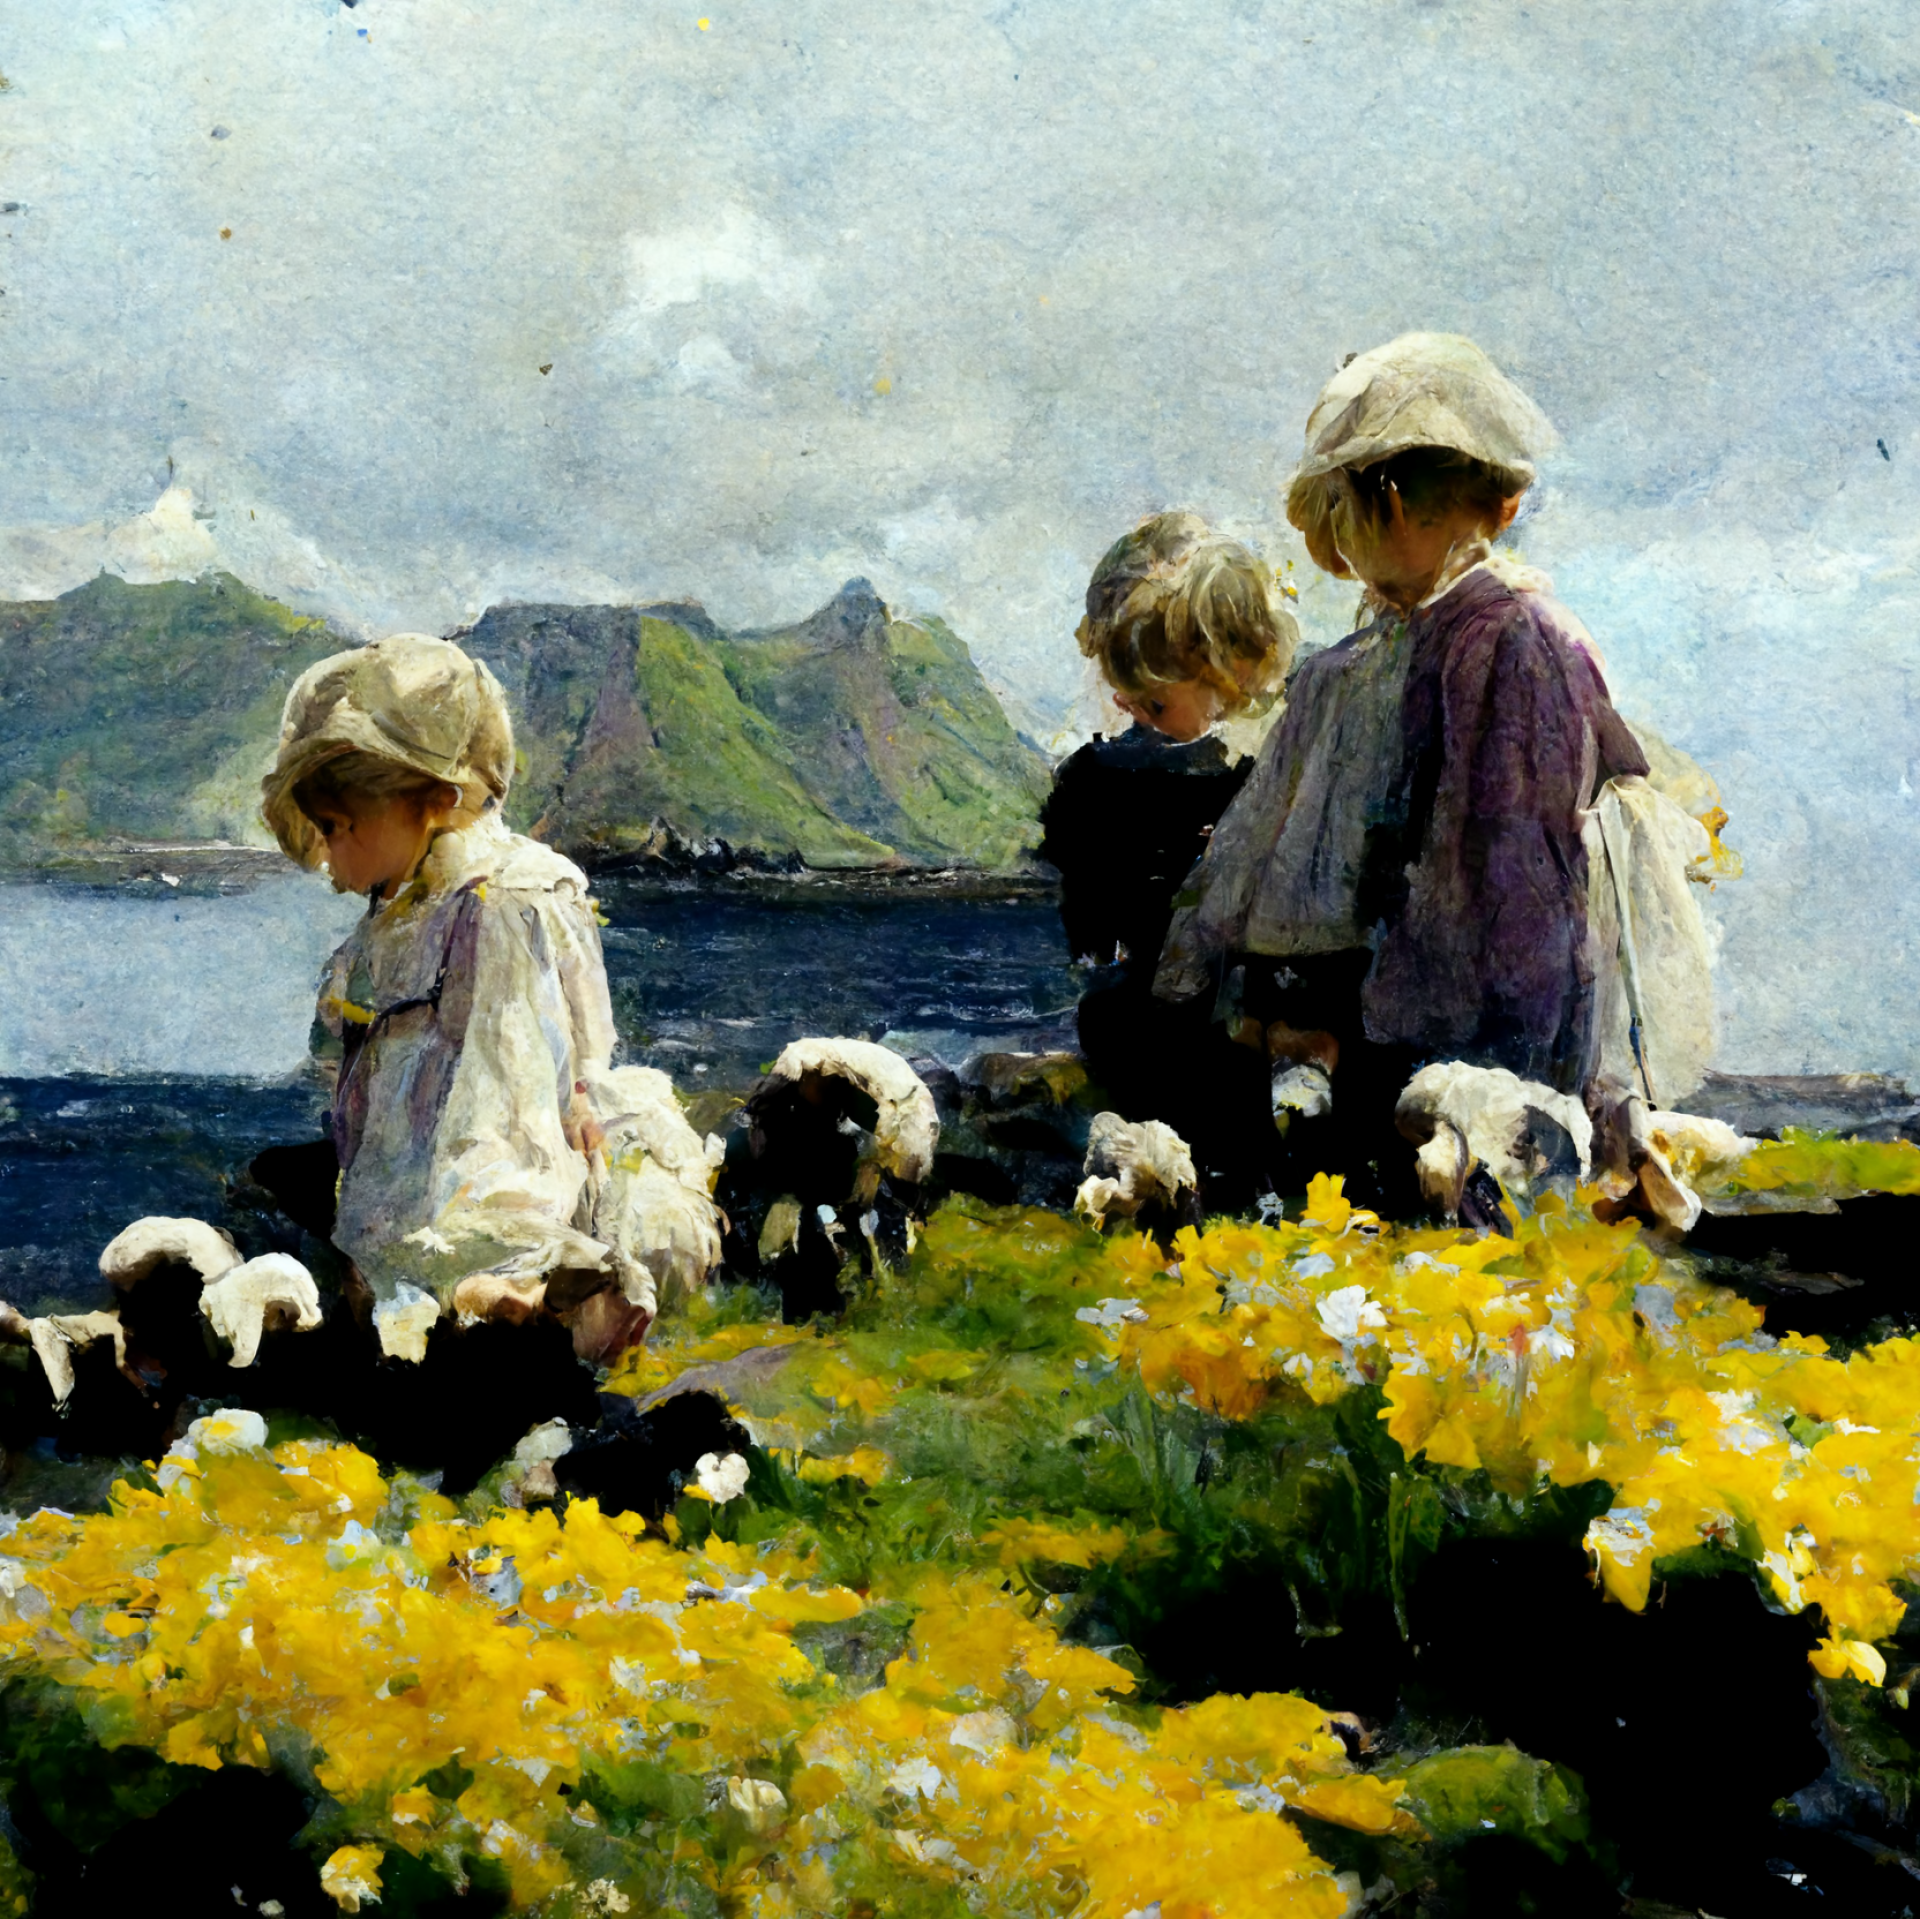 AI-generated image from Midjourney, the Faroe Islands inspired by Joaquín Sorolla.